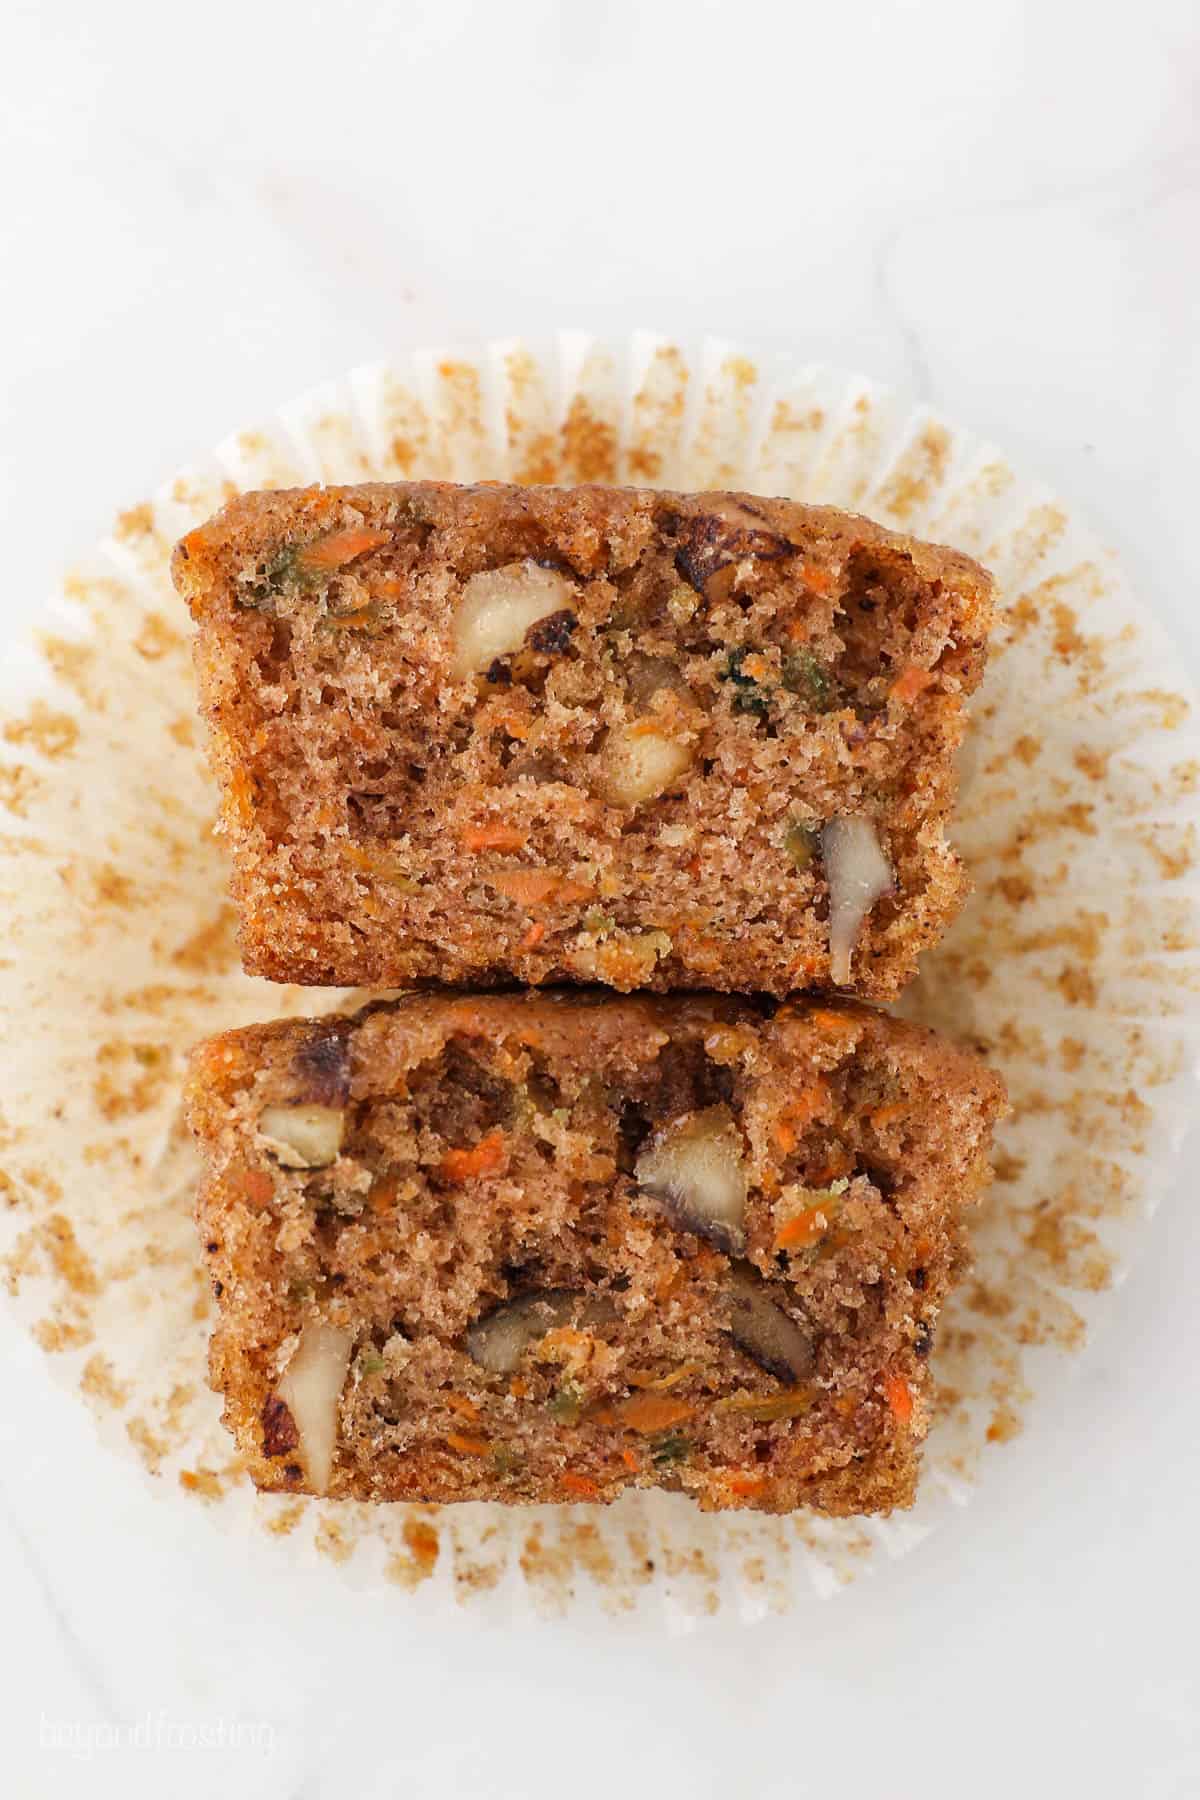 A carrot cake cupcake cut in half to reveal its moist and tender interior